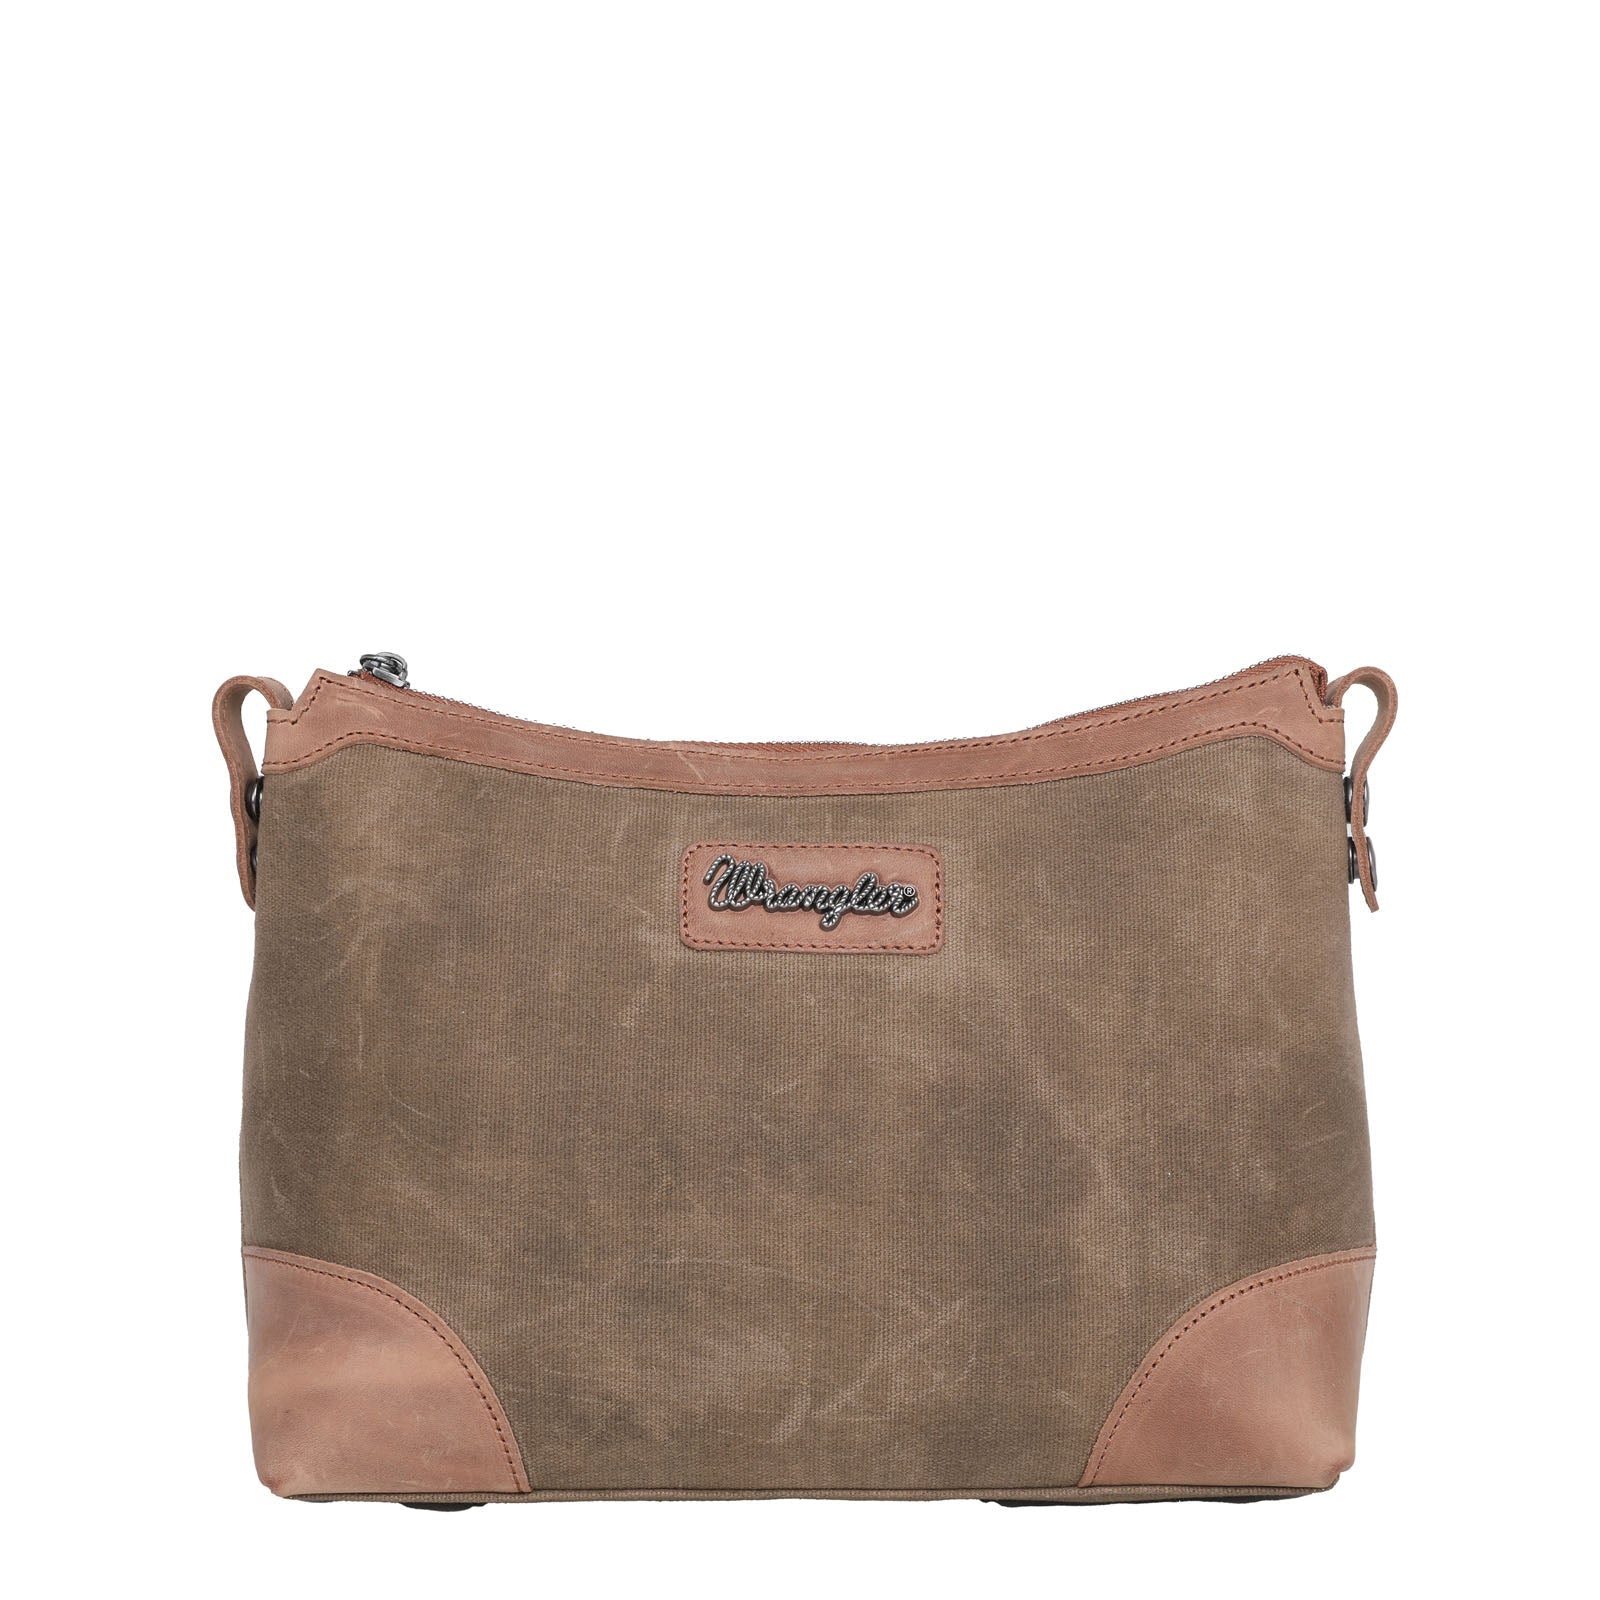 Wrangler Full Distressed Leather Concealed Carry Tote with Detachable Crossbody Bag Brown